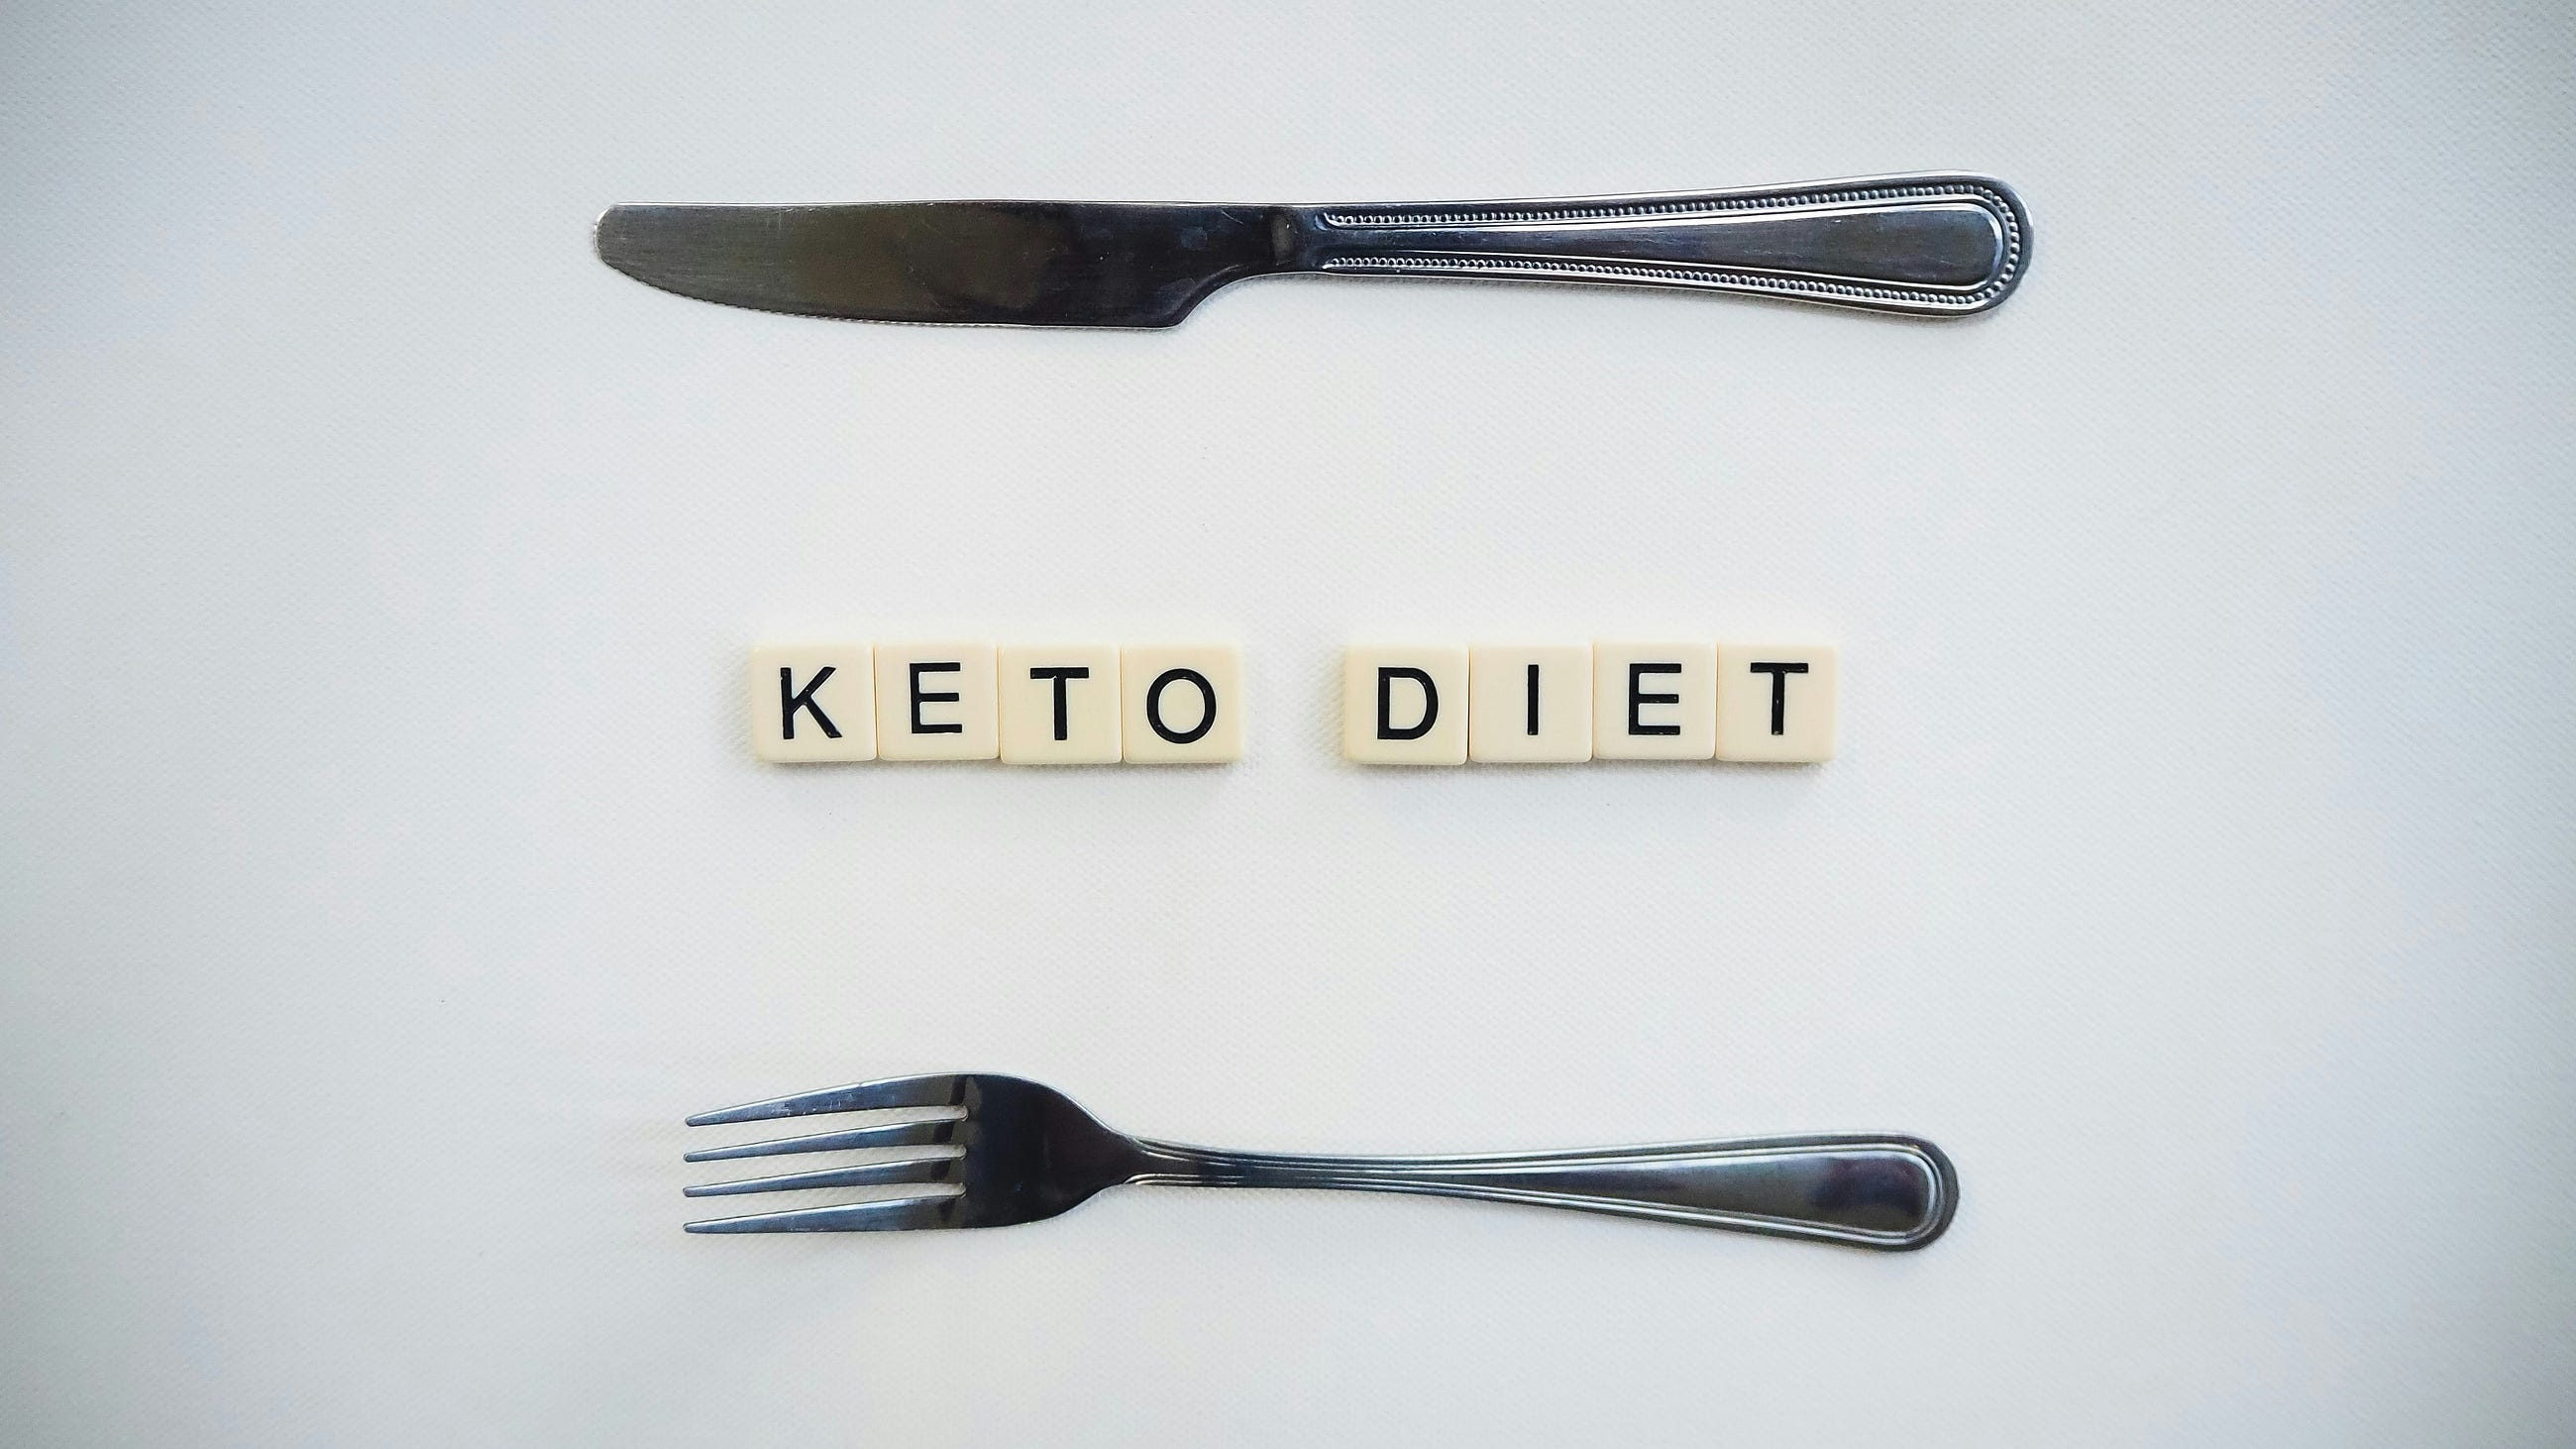 How the Meat and Dairy Industry Fund Carnivore and Keto Diet Fads Despite Health Concerns